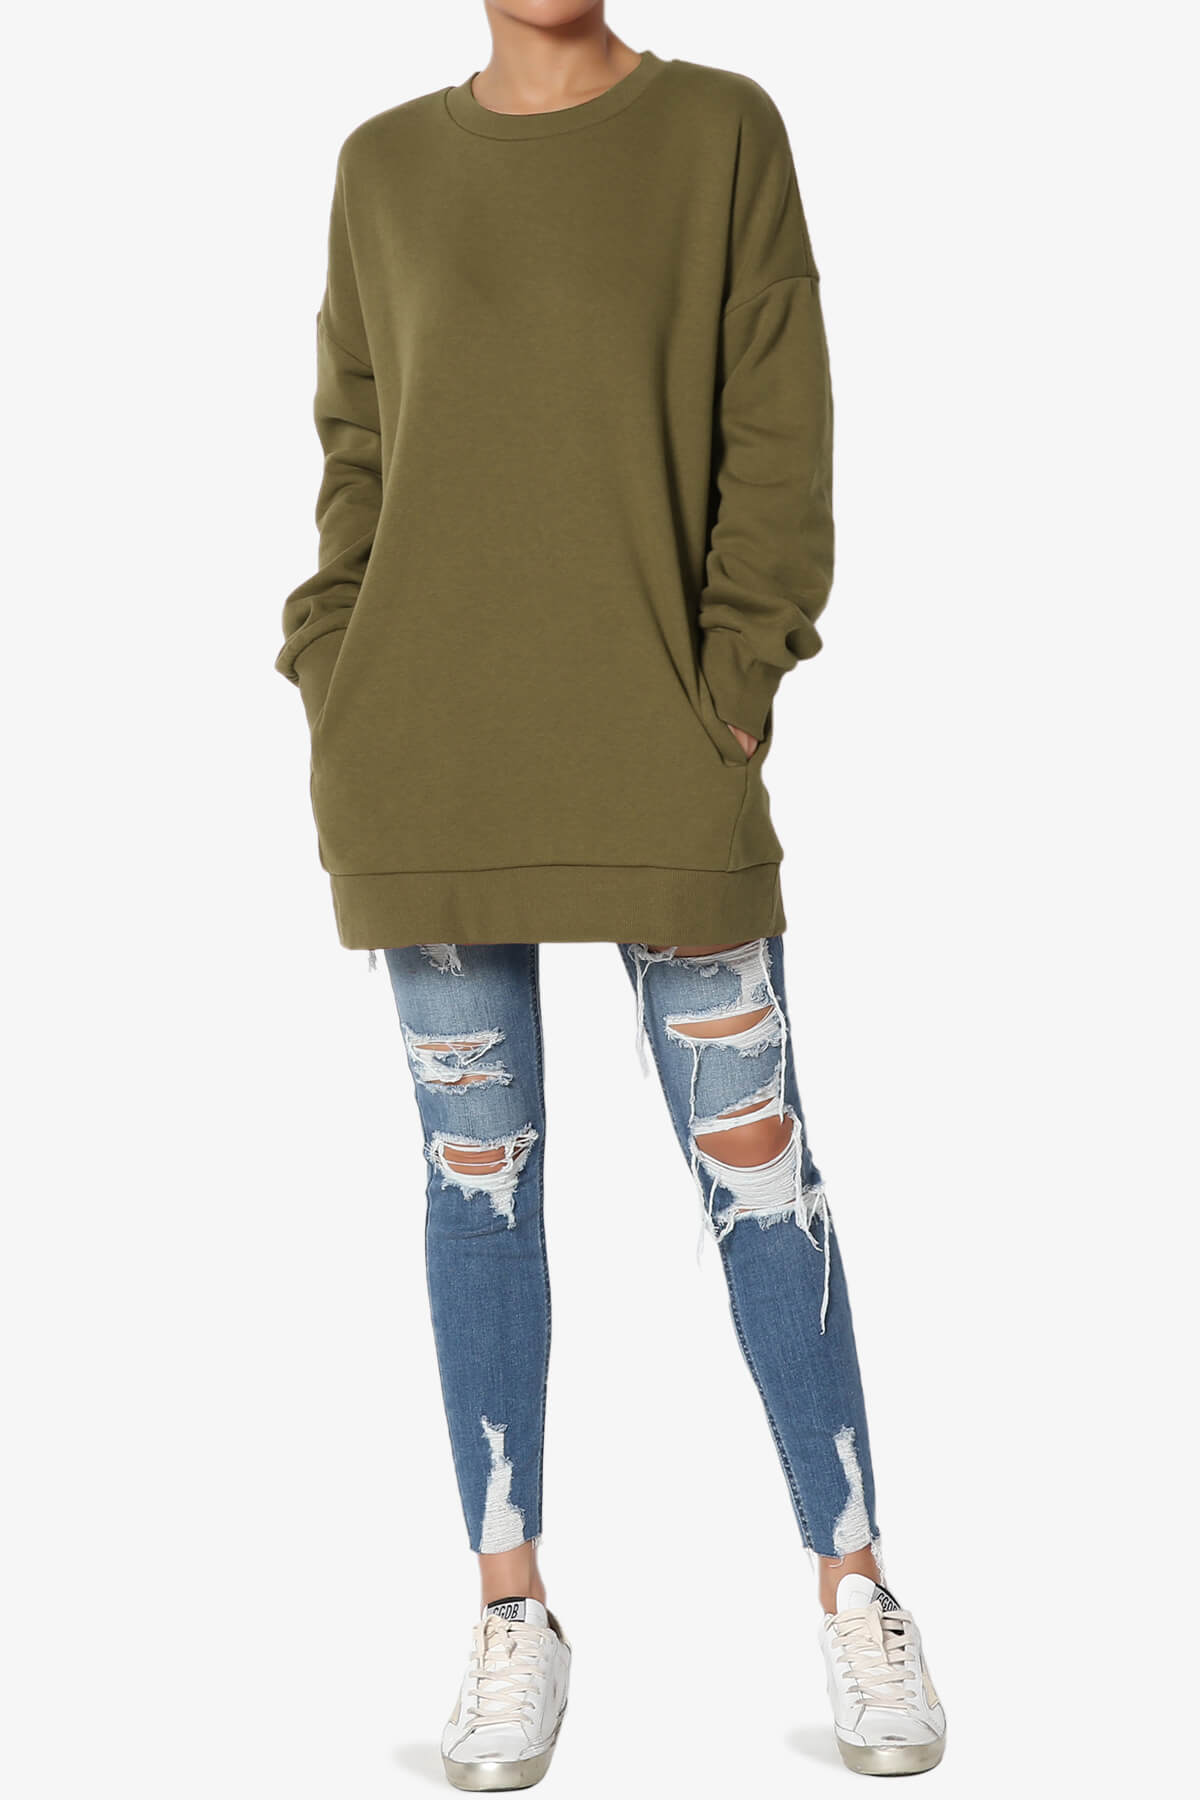 Load image into Gallery viewer, Accie Crew Neck Pullover Sweatshirts OLIVE KHAKI_6
